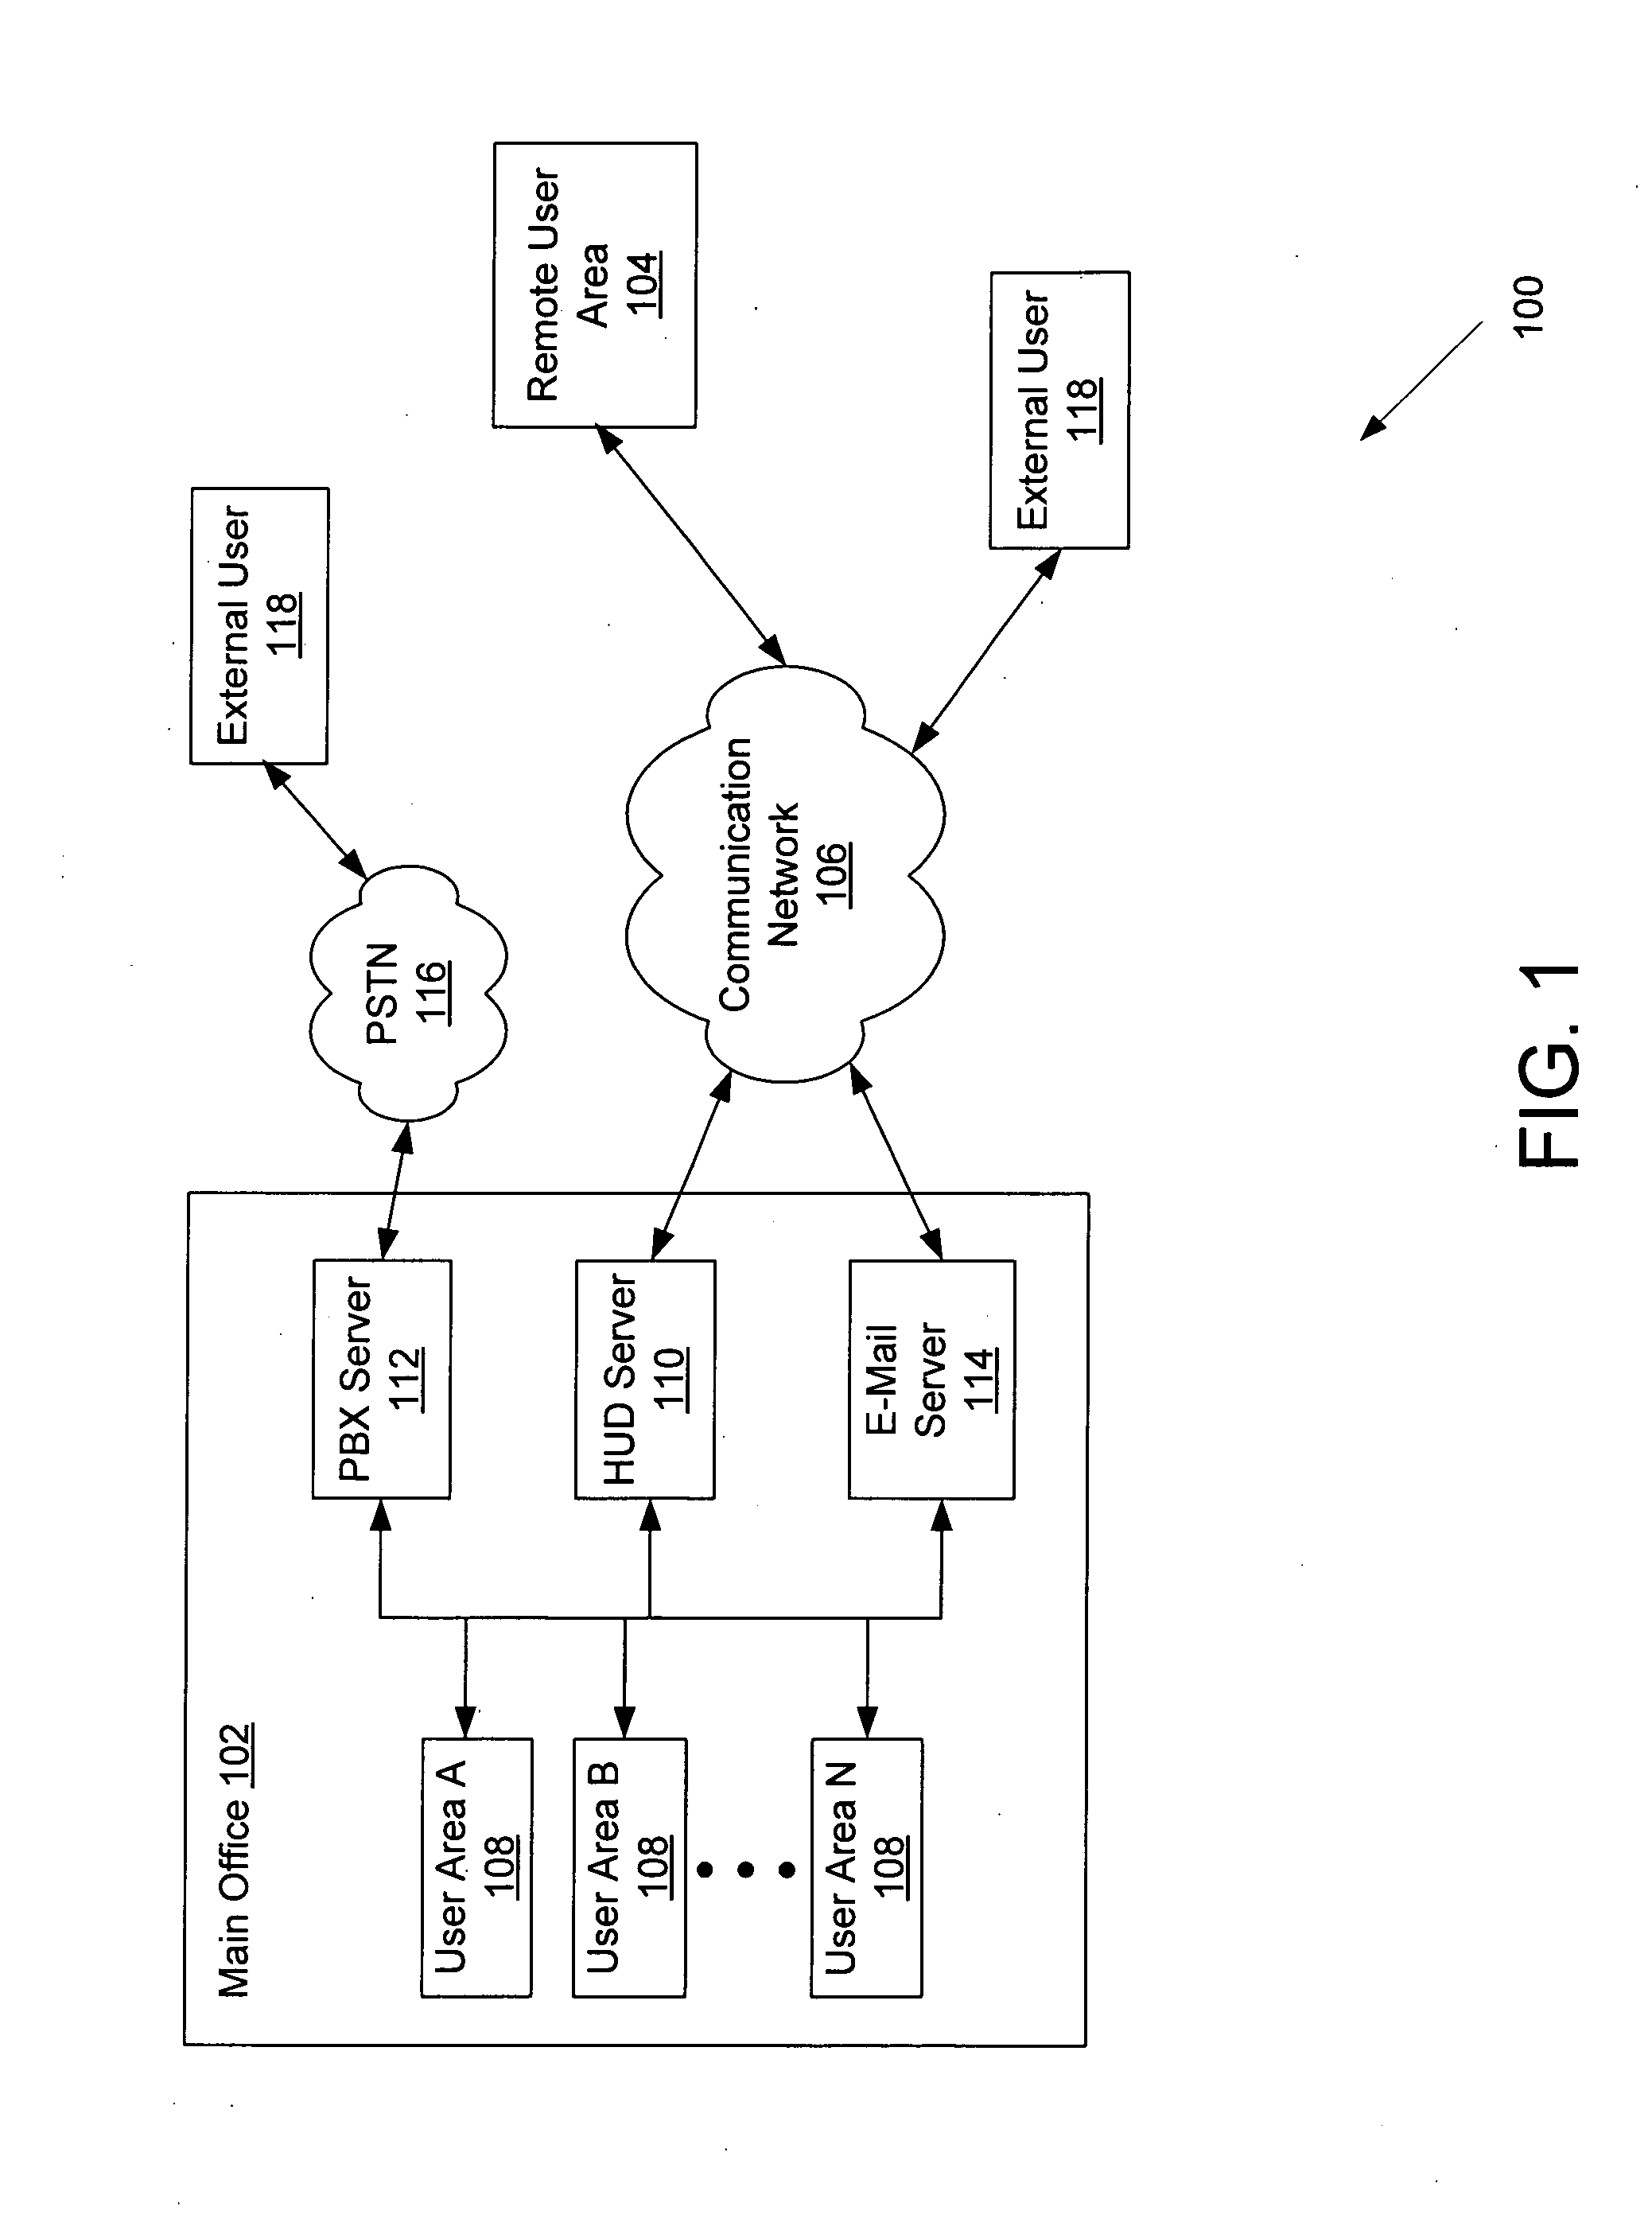 Intelligent presence management in a communication routing system